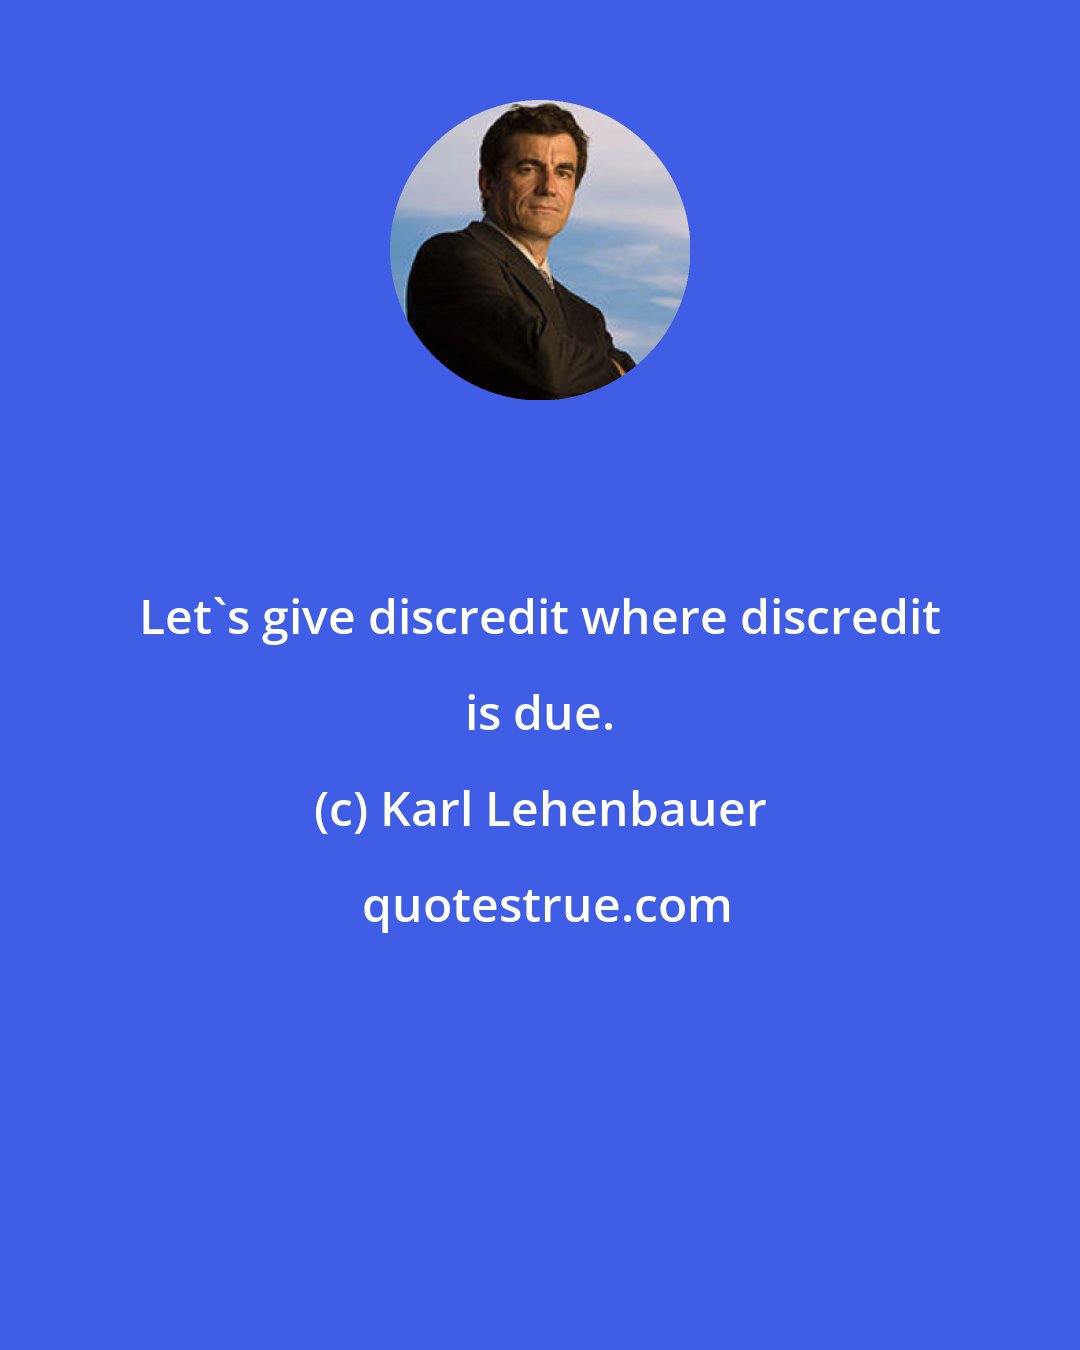 Karl Lehenbauer: Let's give discredit where discredit is due.